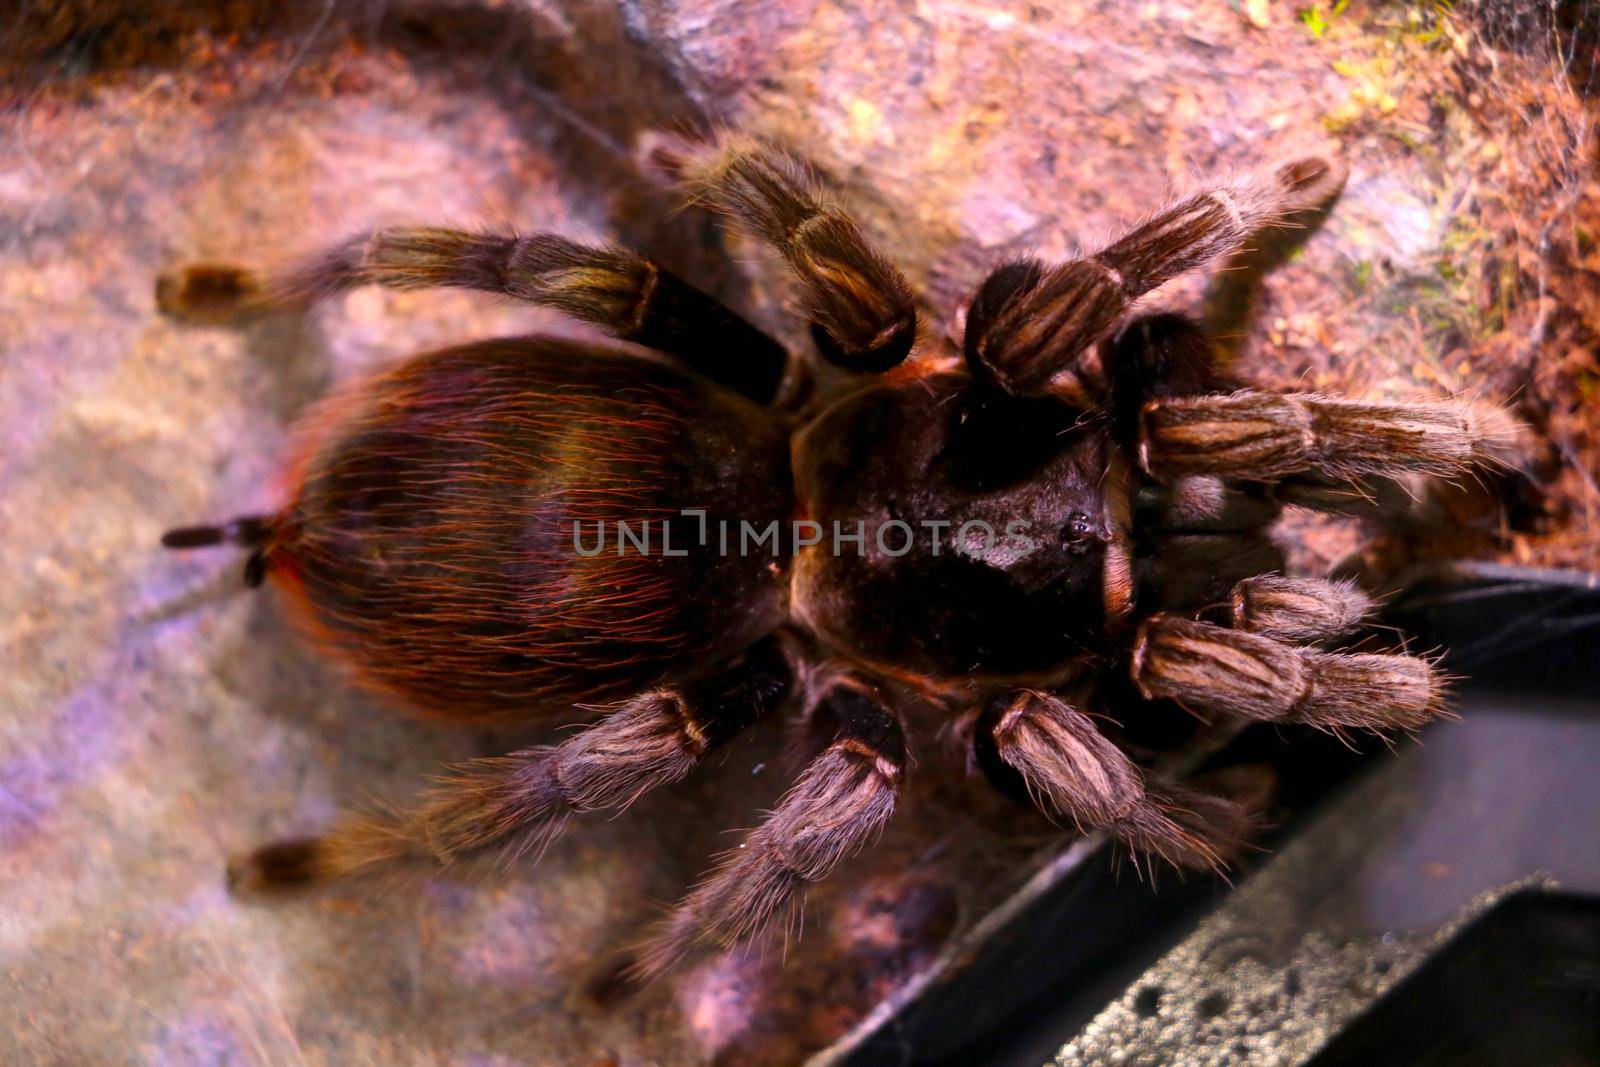 View from above on a large poisonous beautiful spider. by kip02kas